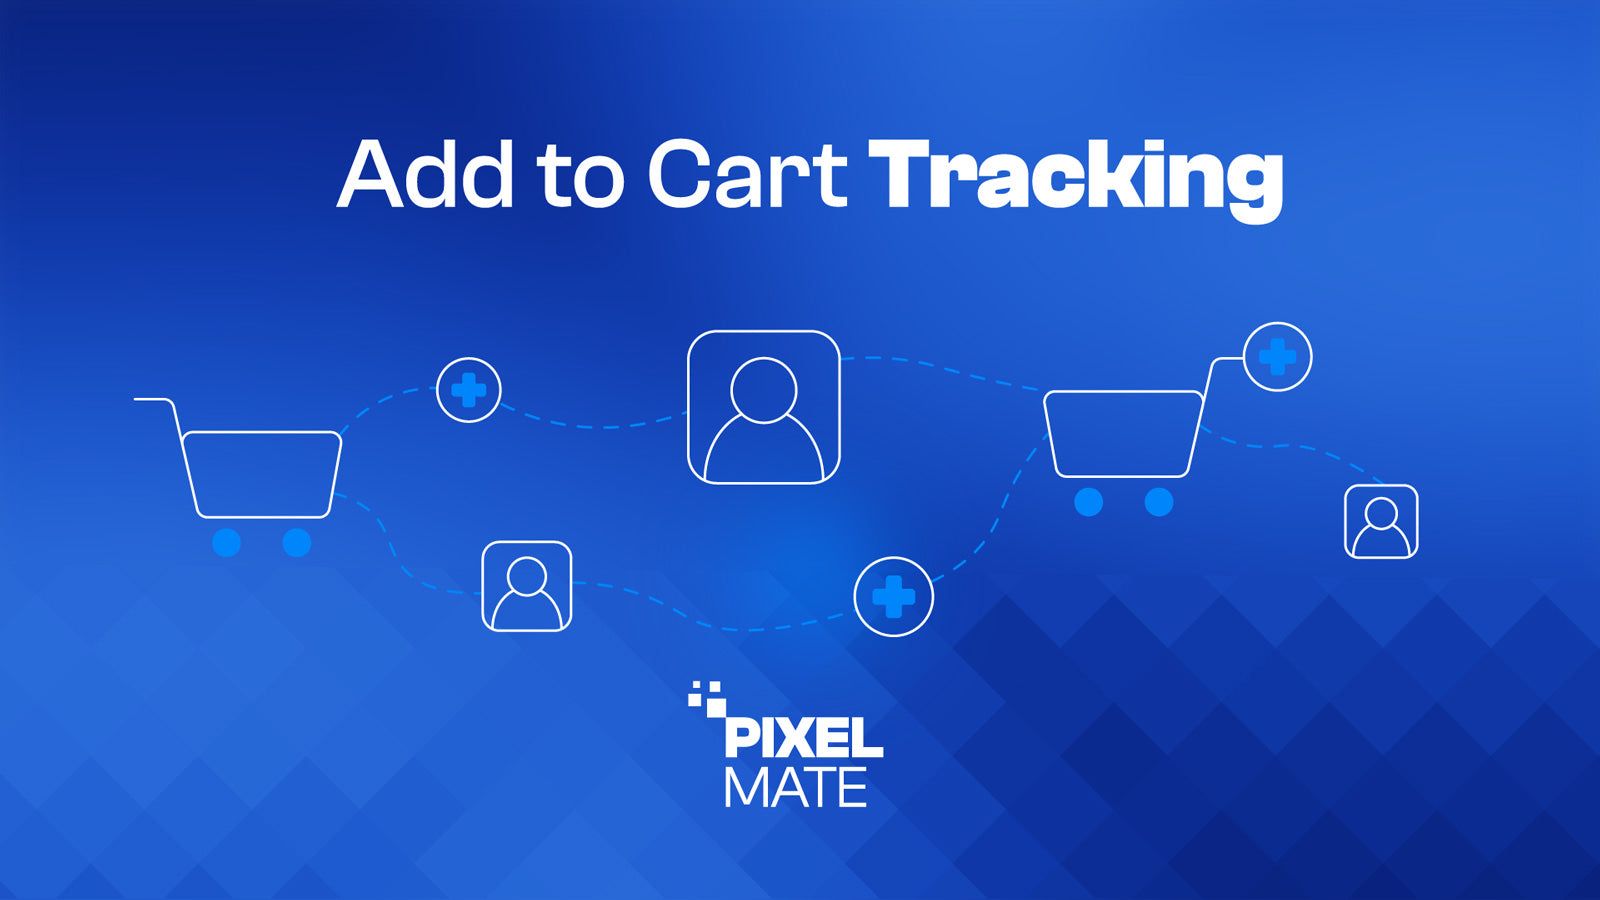 Add to Cart Tracking